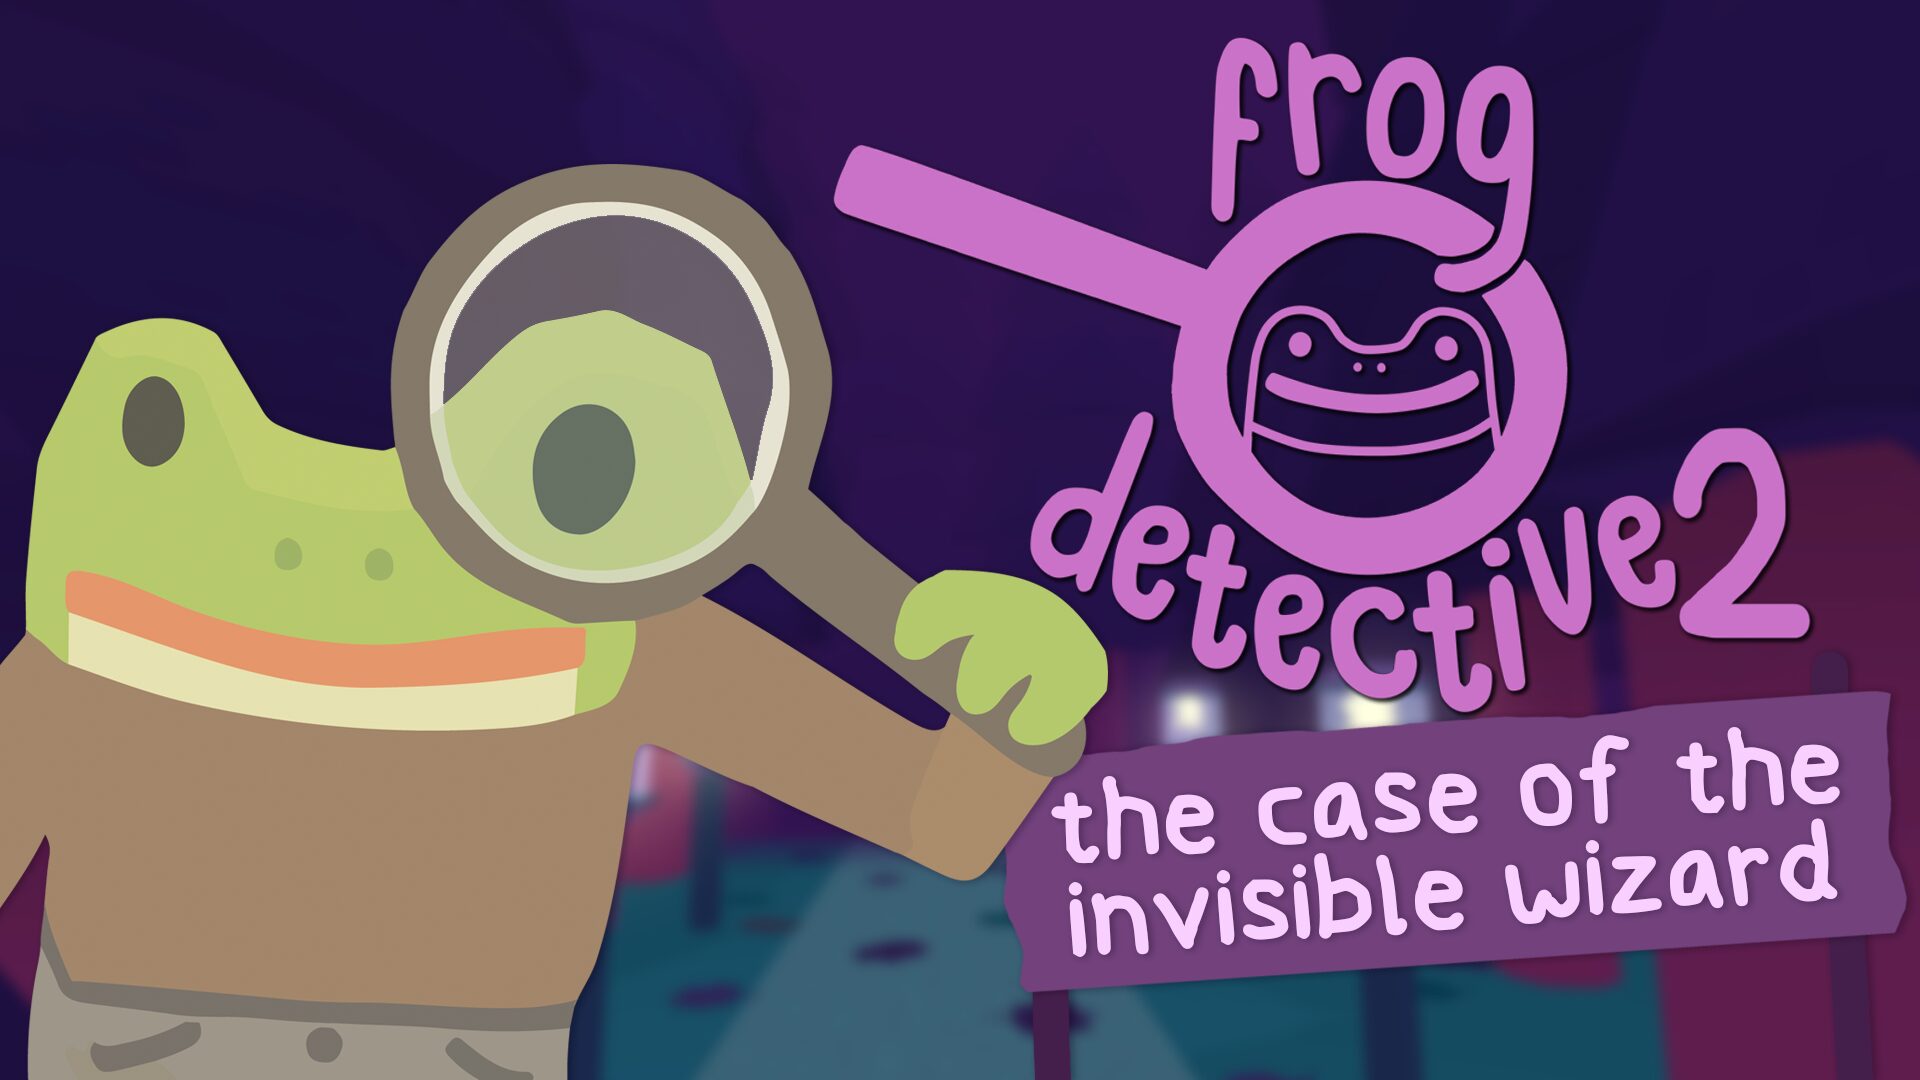 Frog Detective 2: The Case of the Invisible Wizard” Hops Onto Steam